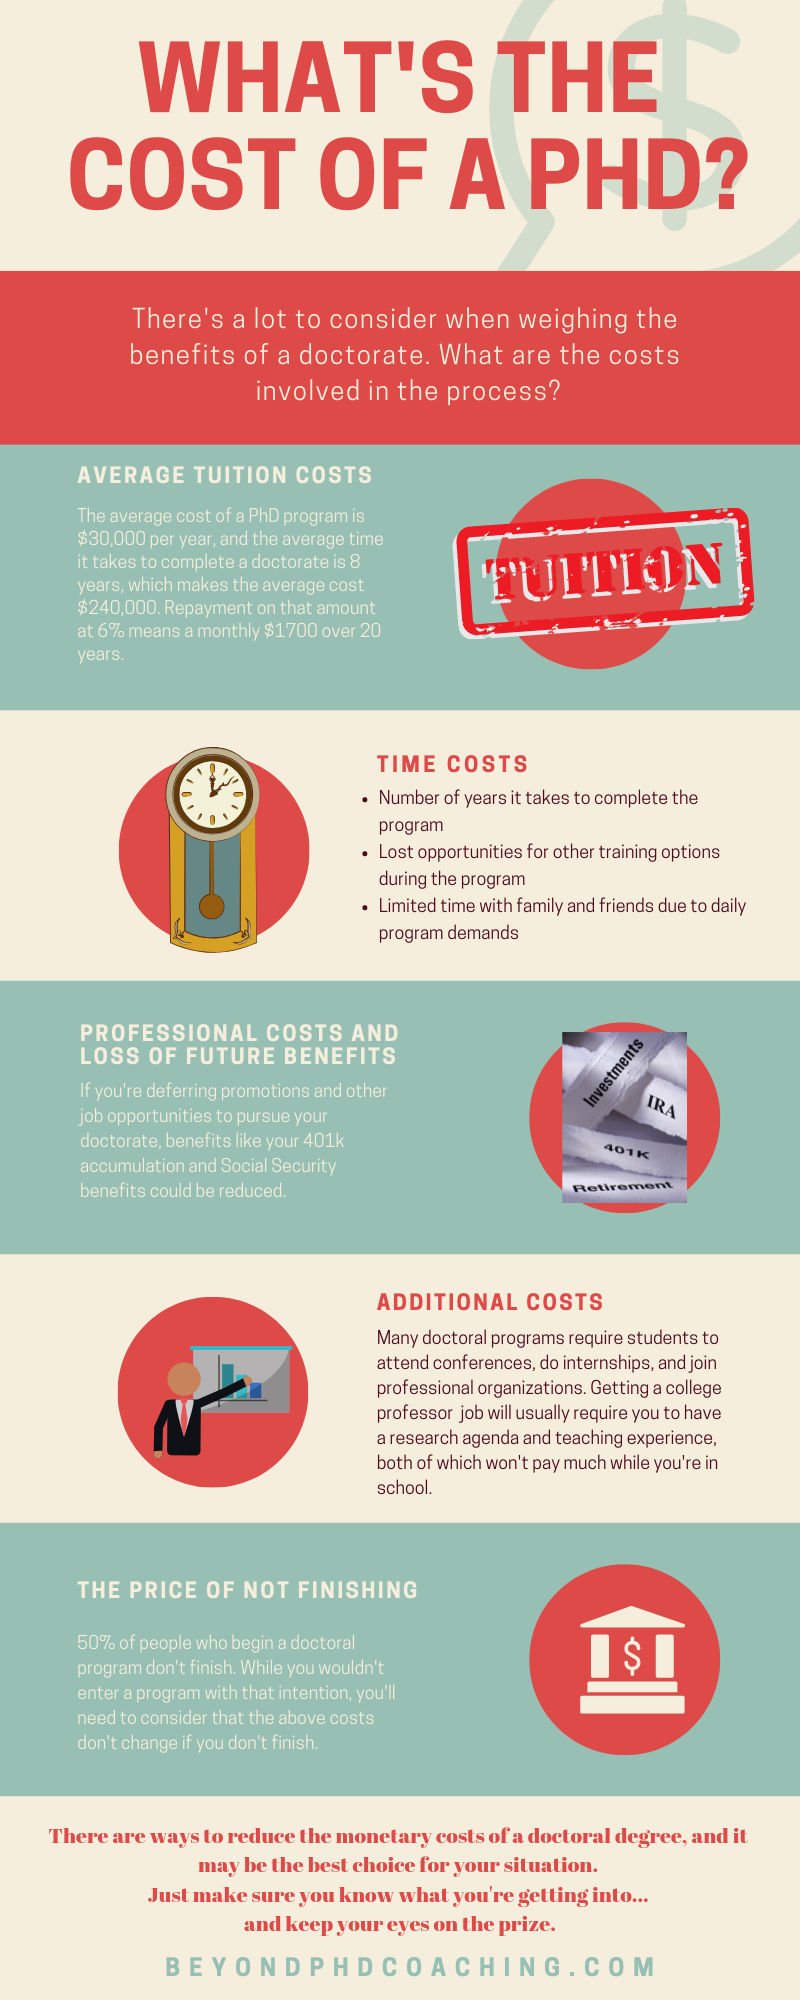 How Much Does a PhD Cost?